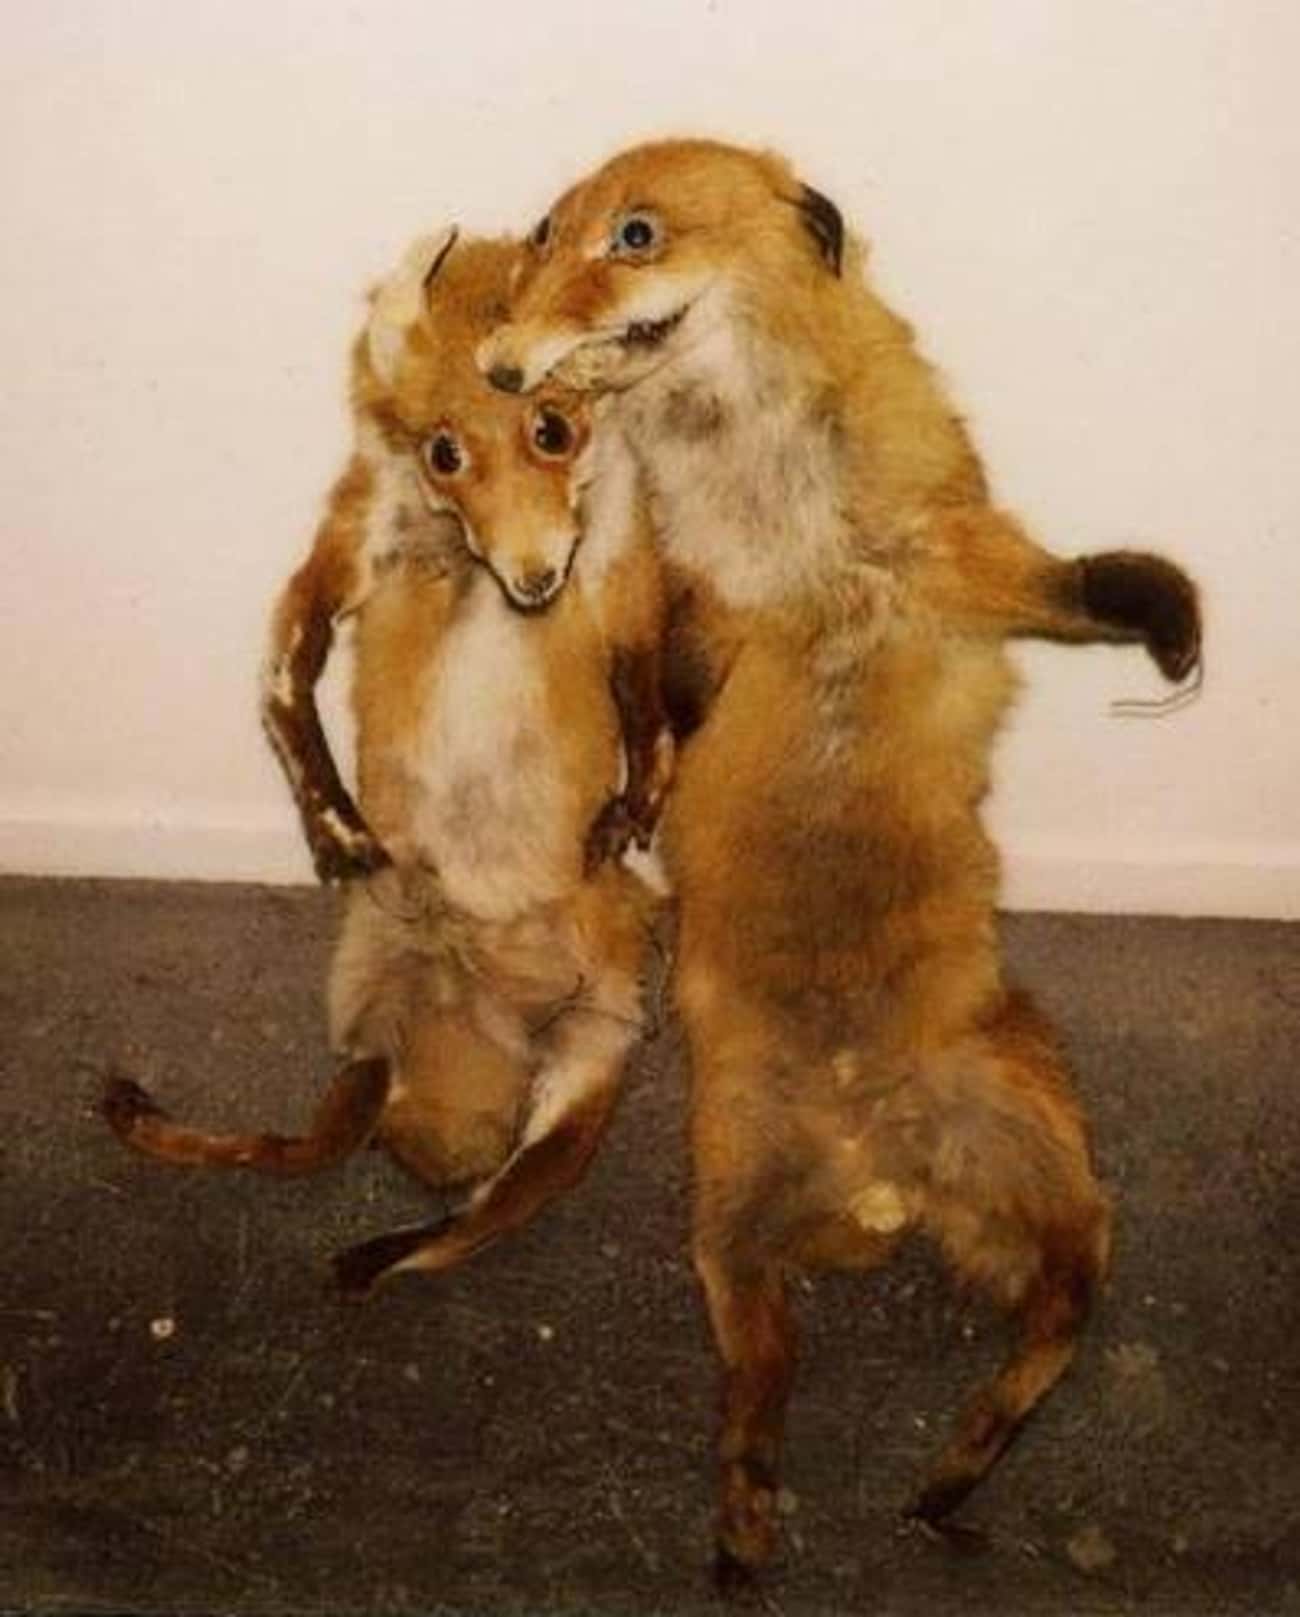 This Support Group For Taxidermy Gone Horribly Wrong